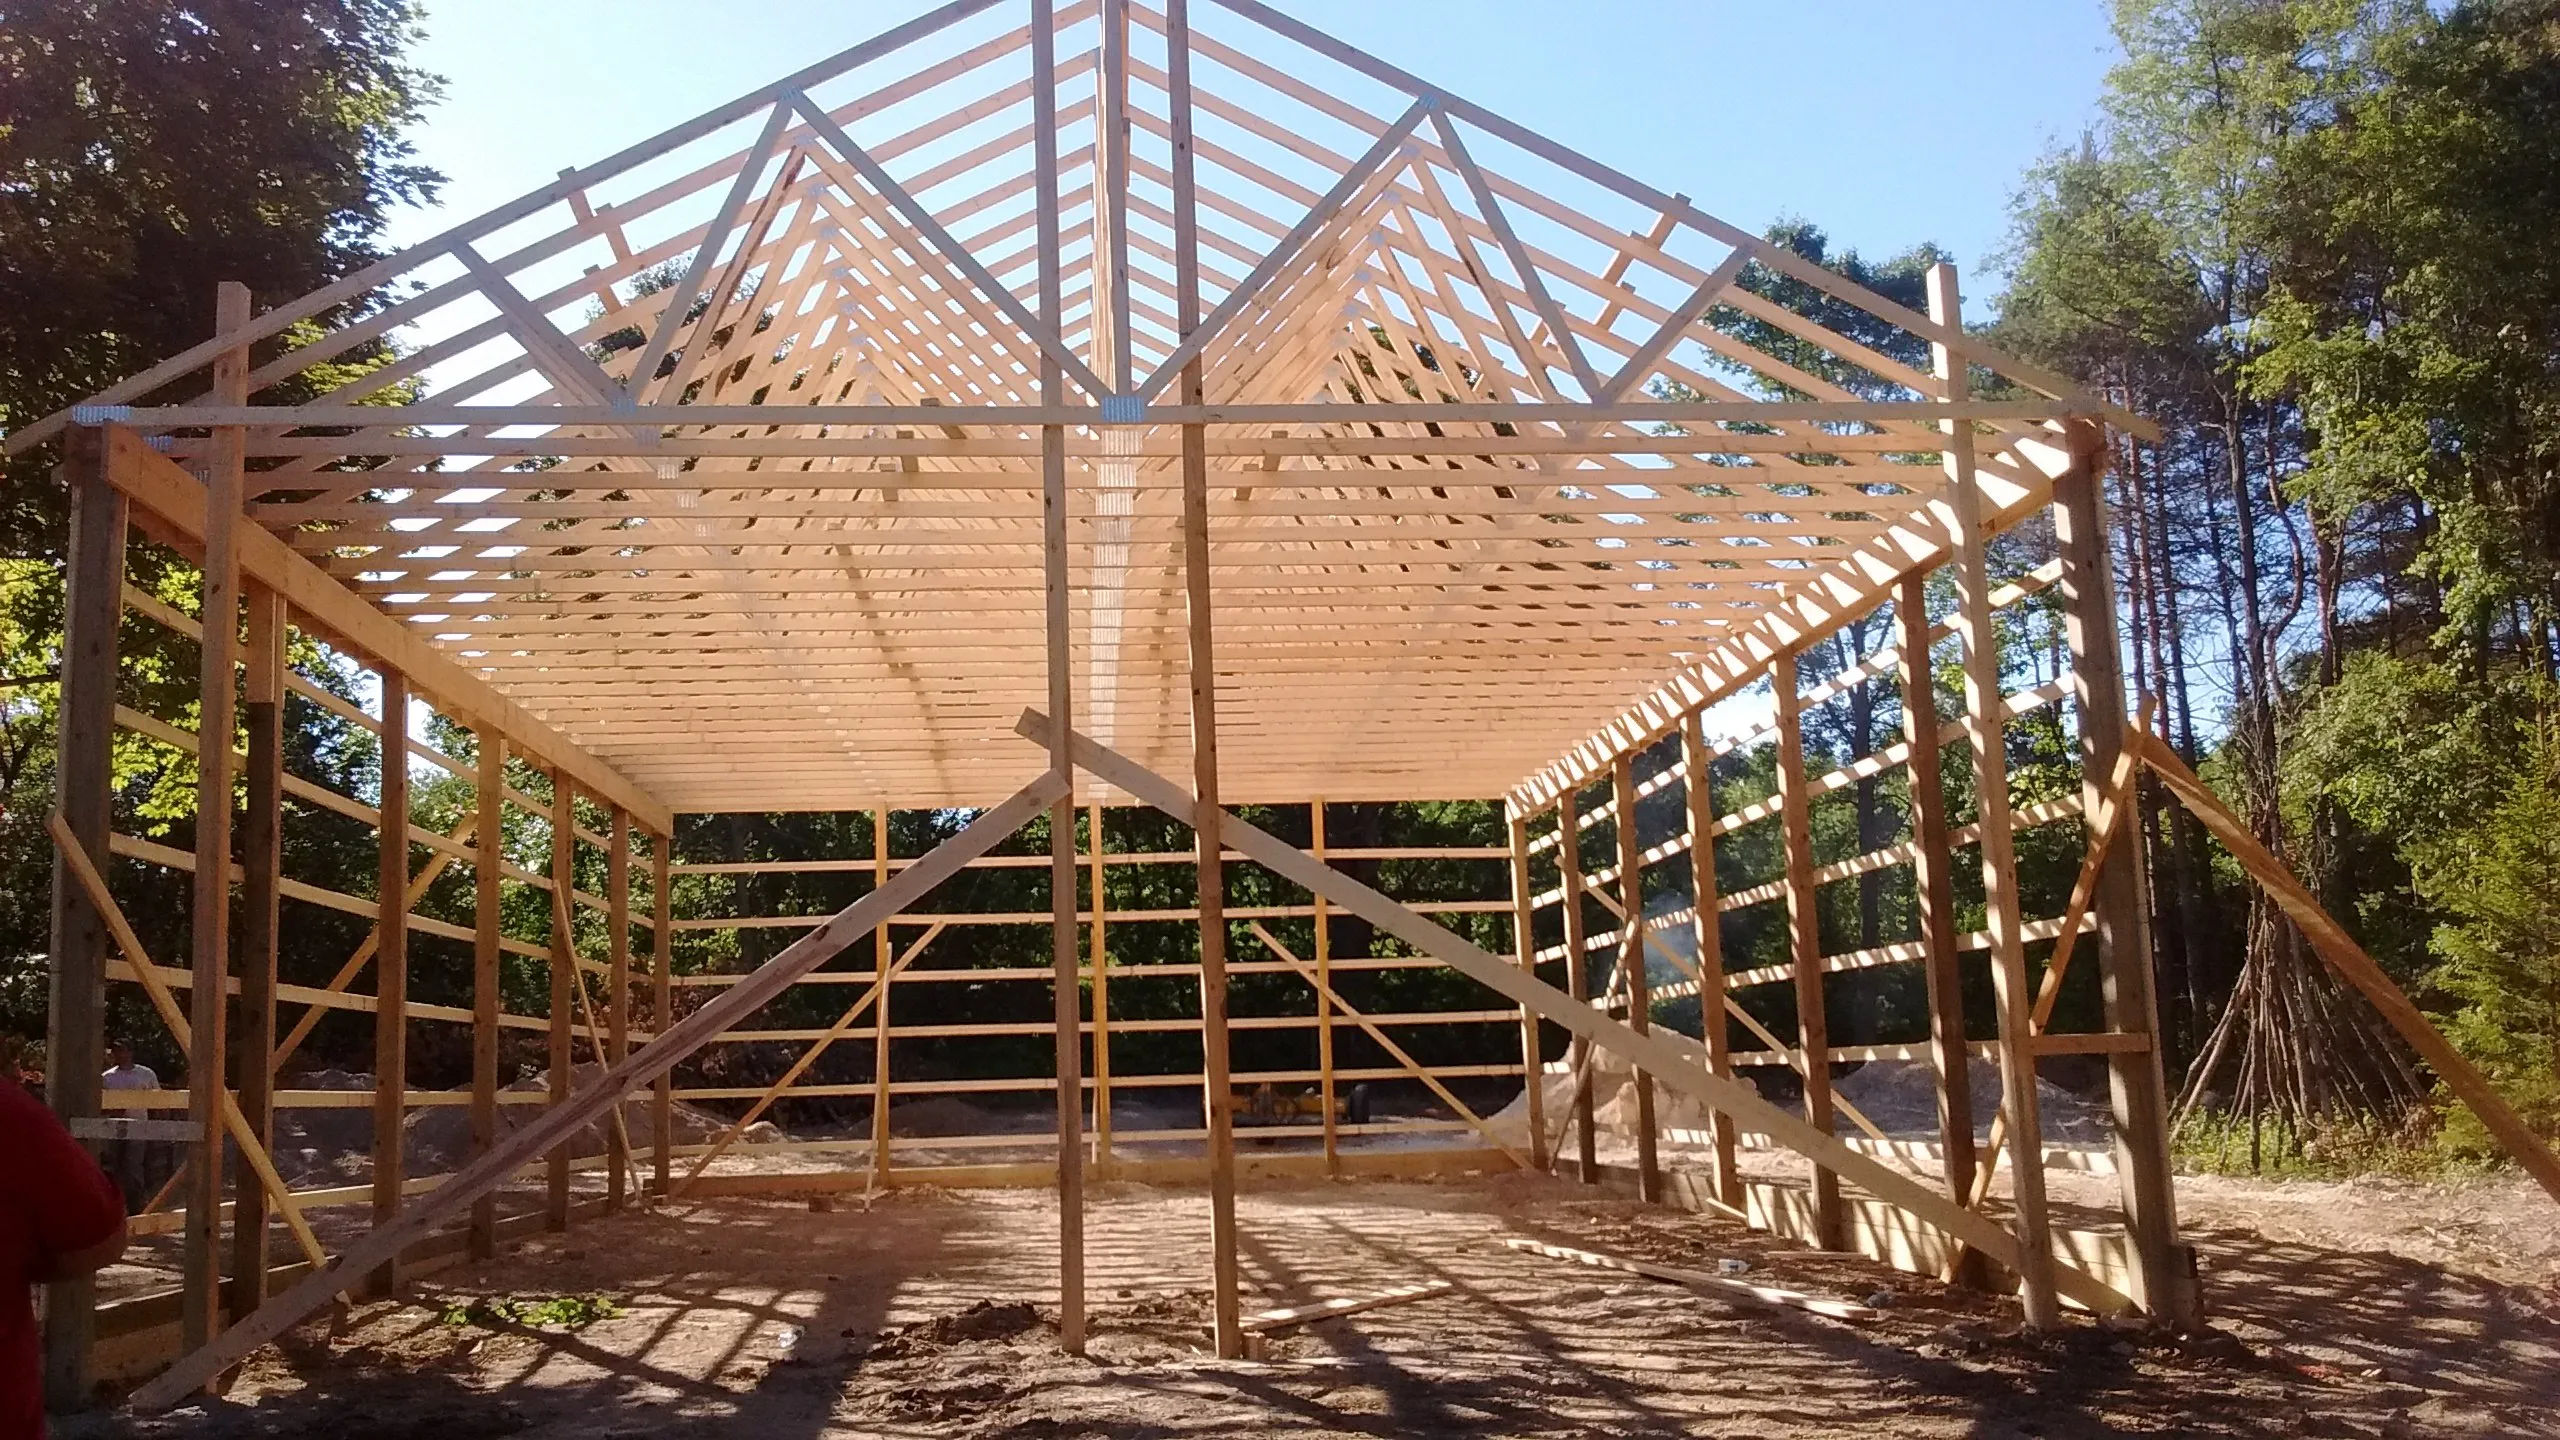 New pole barn construction being built and framed